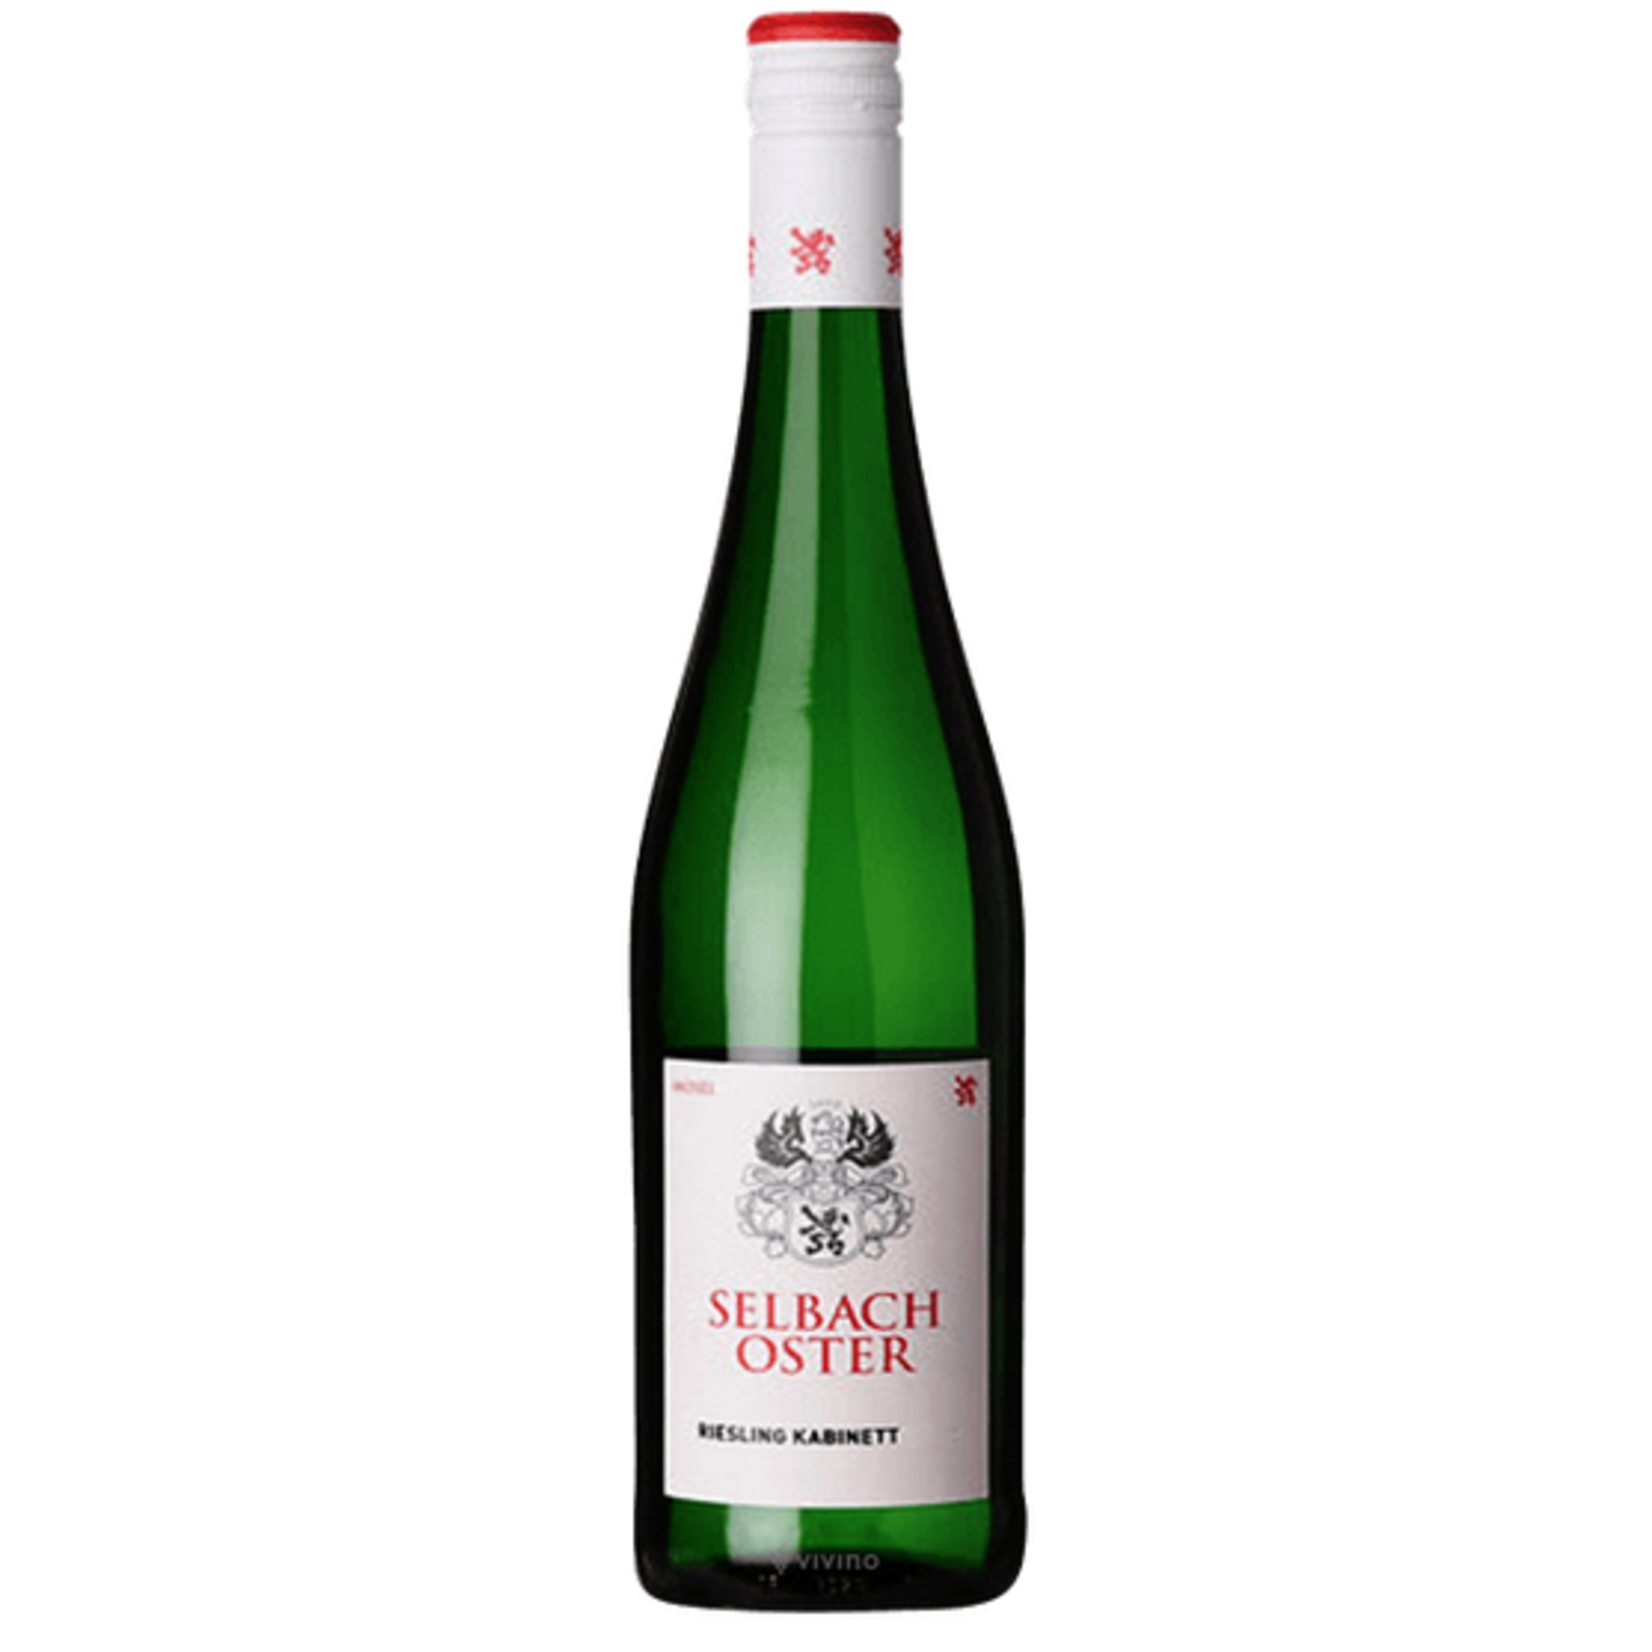 Selbach Oster Selbach-Oster Riesling Kabinett 2020  Mosel, Germany